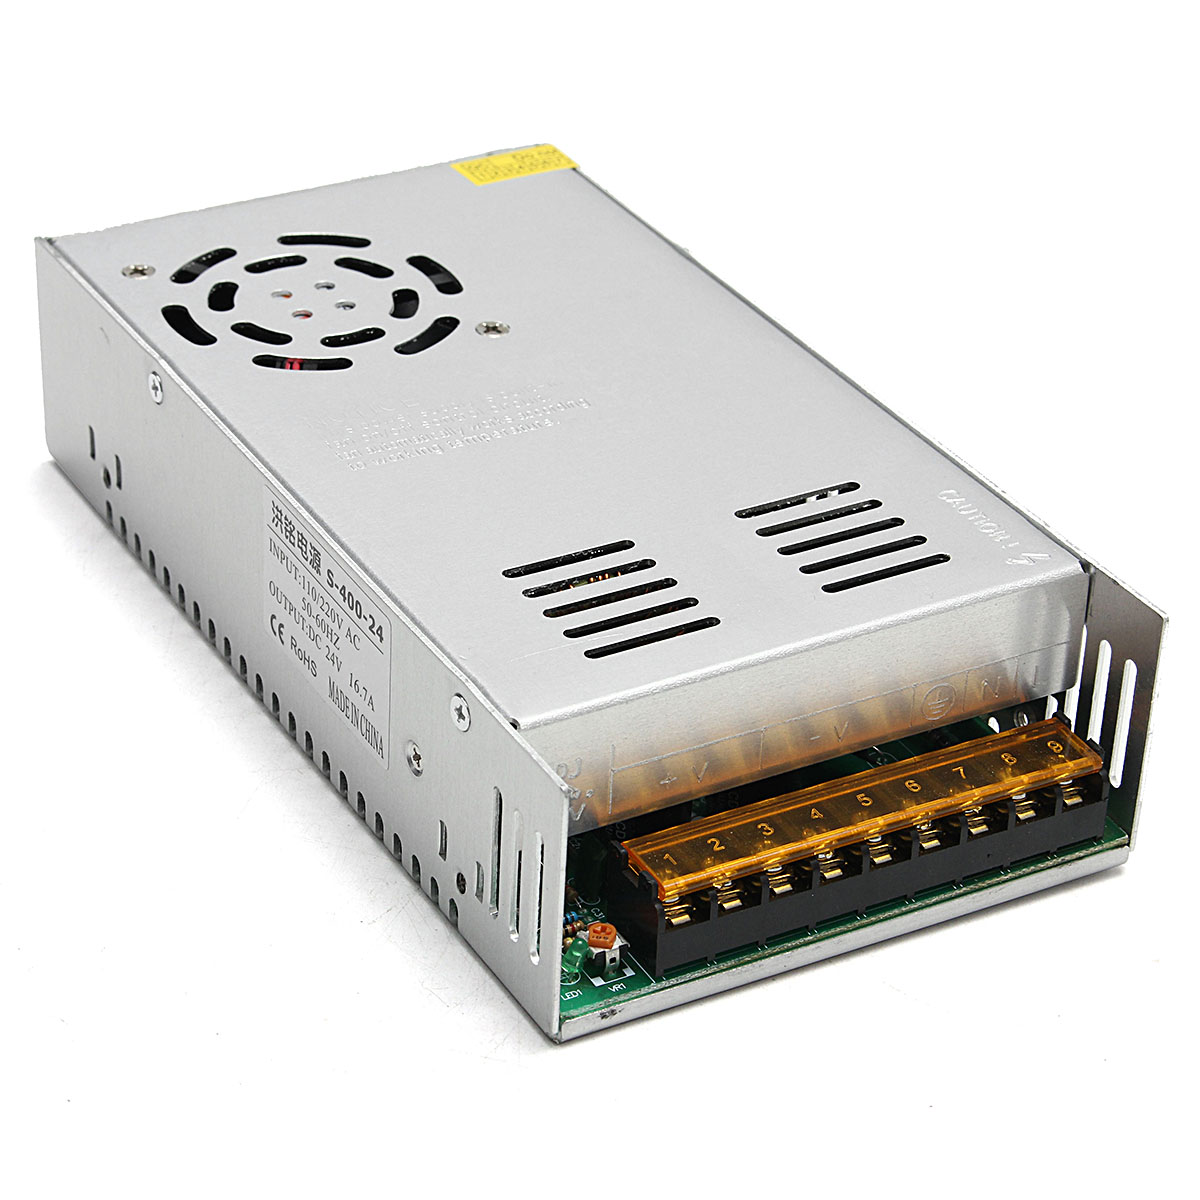 Geekcreitreg-AC-110-240V-Input-To-DC-24V-17A-400W-Switching-Power-Supply-Driver-Board-1272112-2